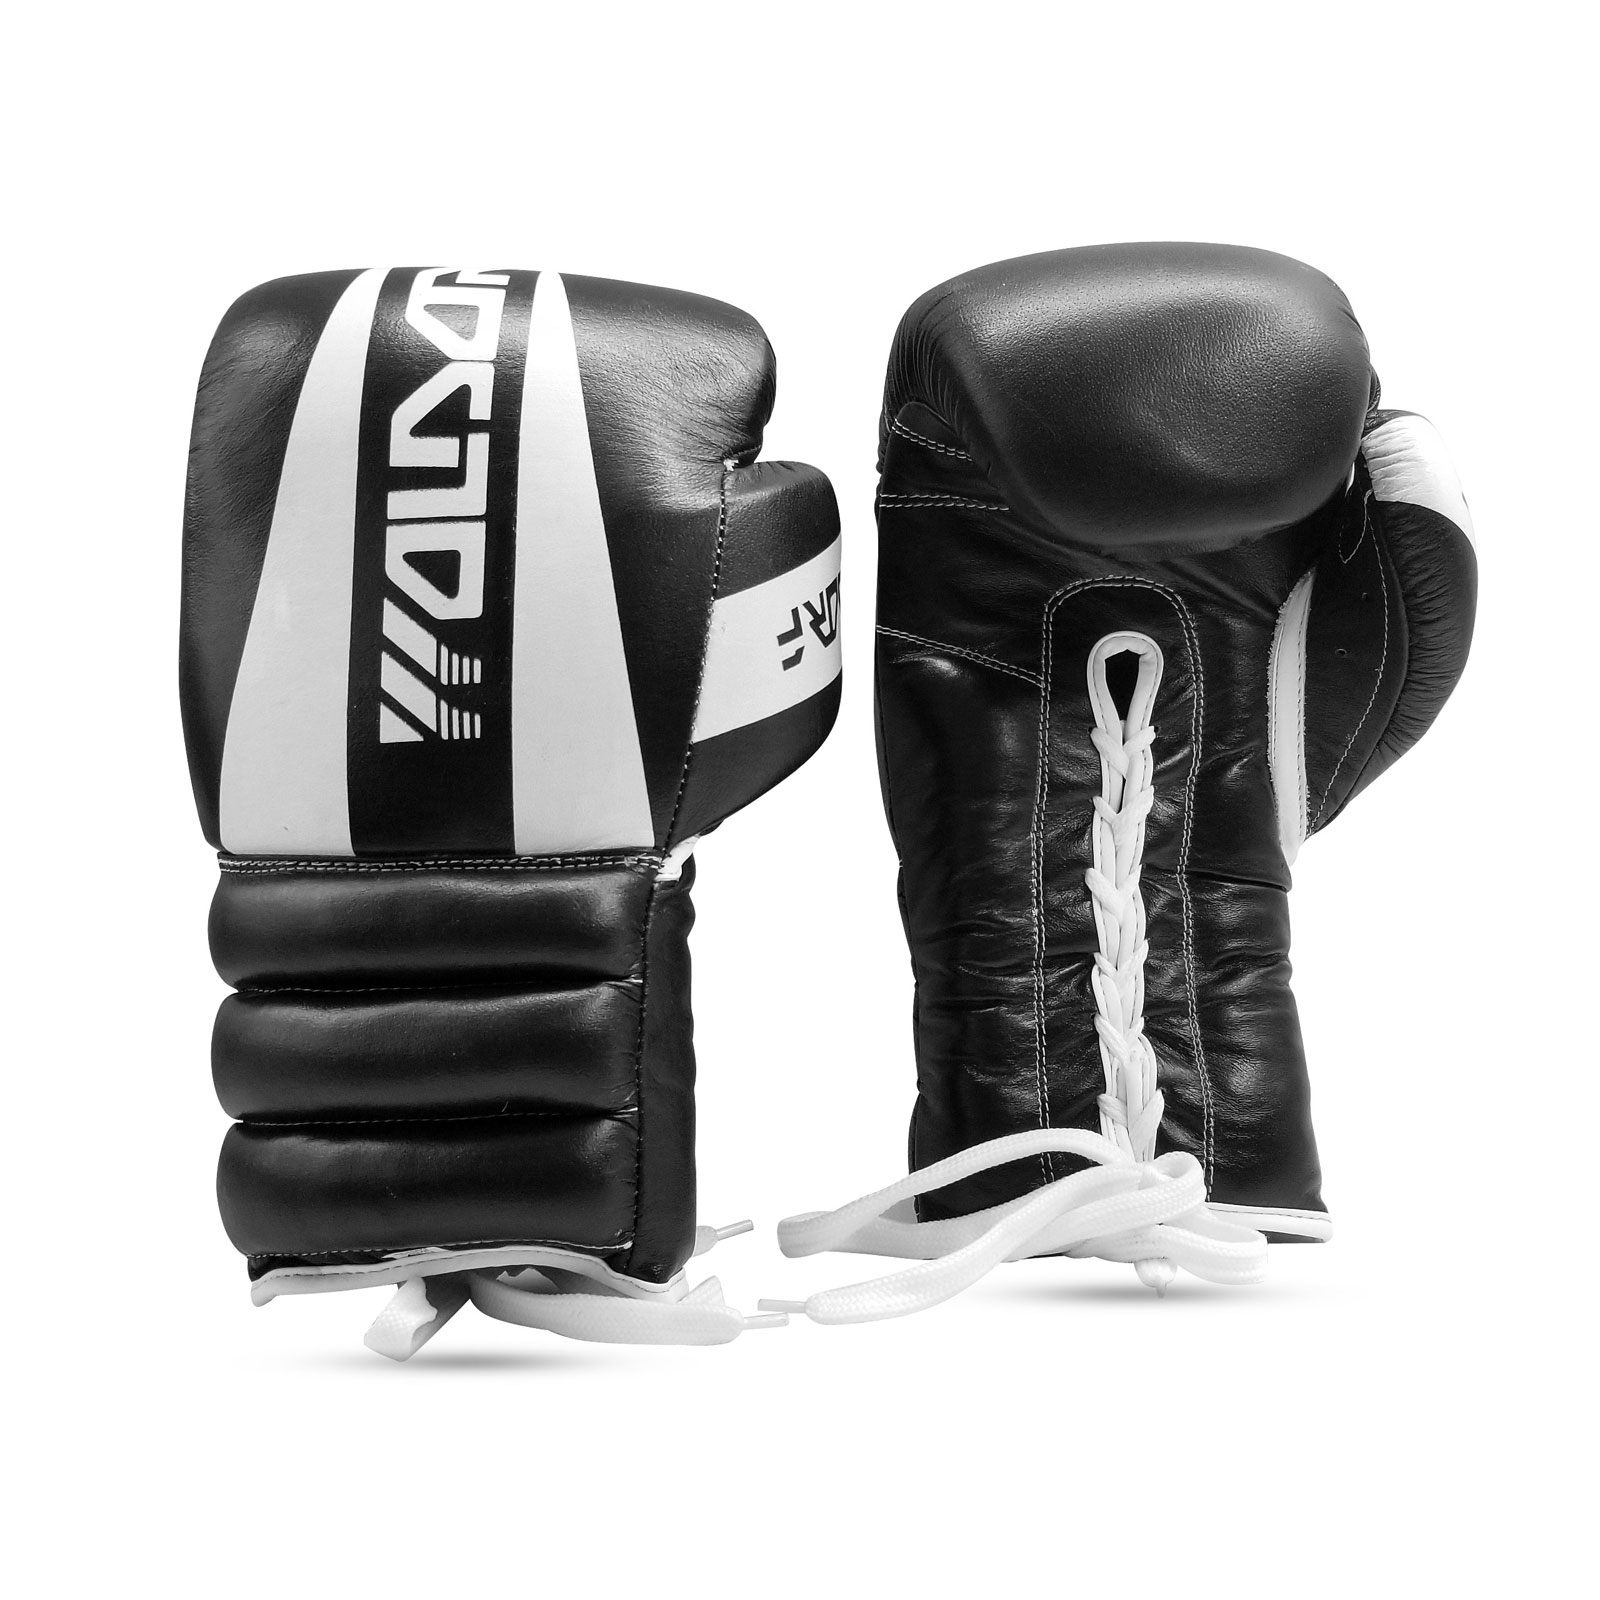 Woldorf USA Boxing Bag Gloves Sparring MMA Fighting Kickboxing Muay Thai Black 